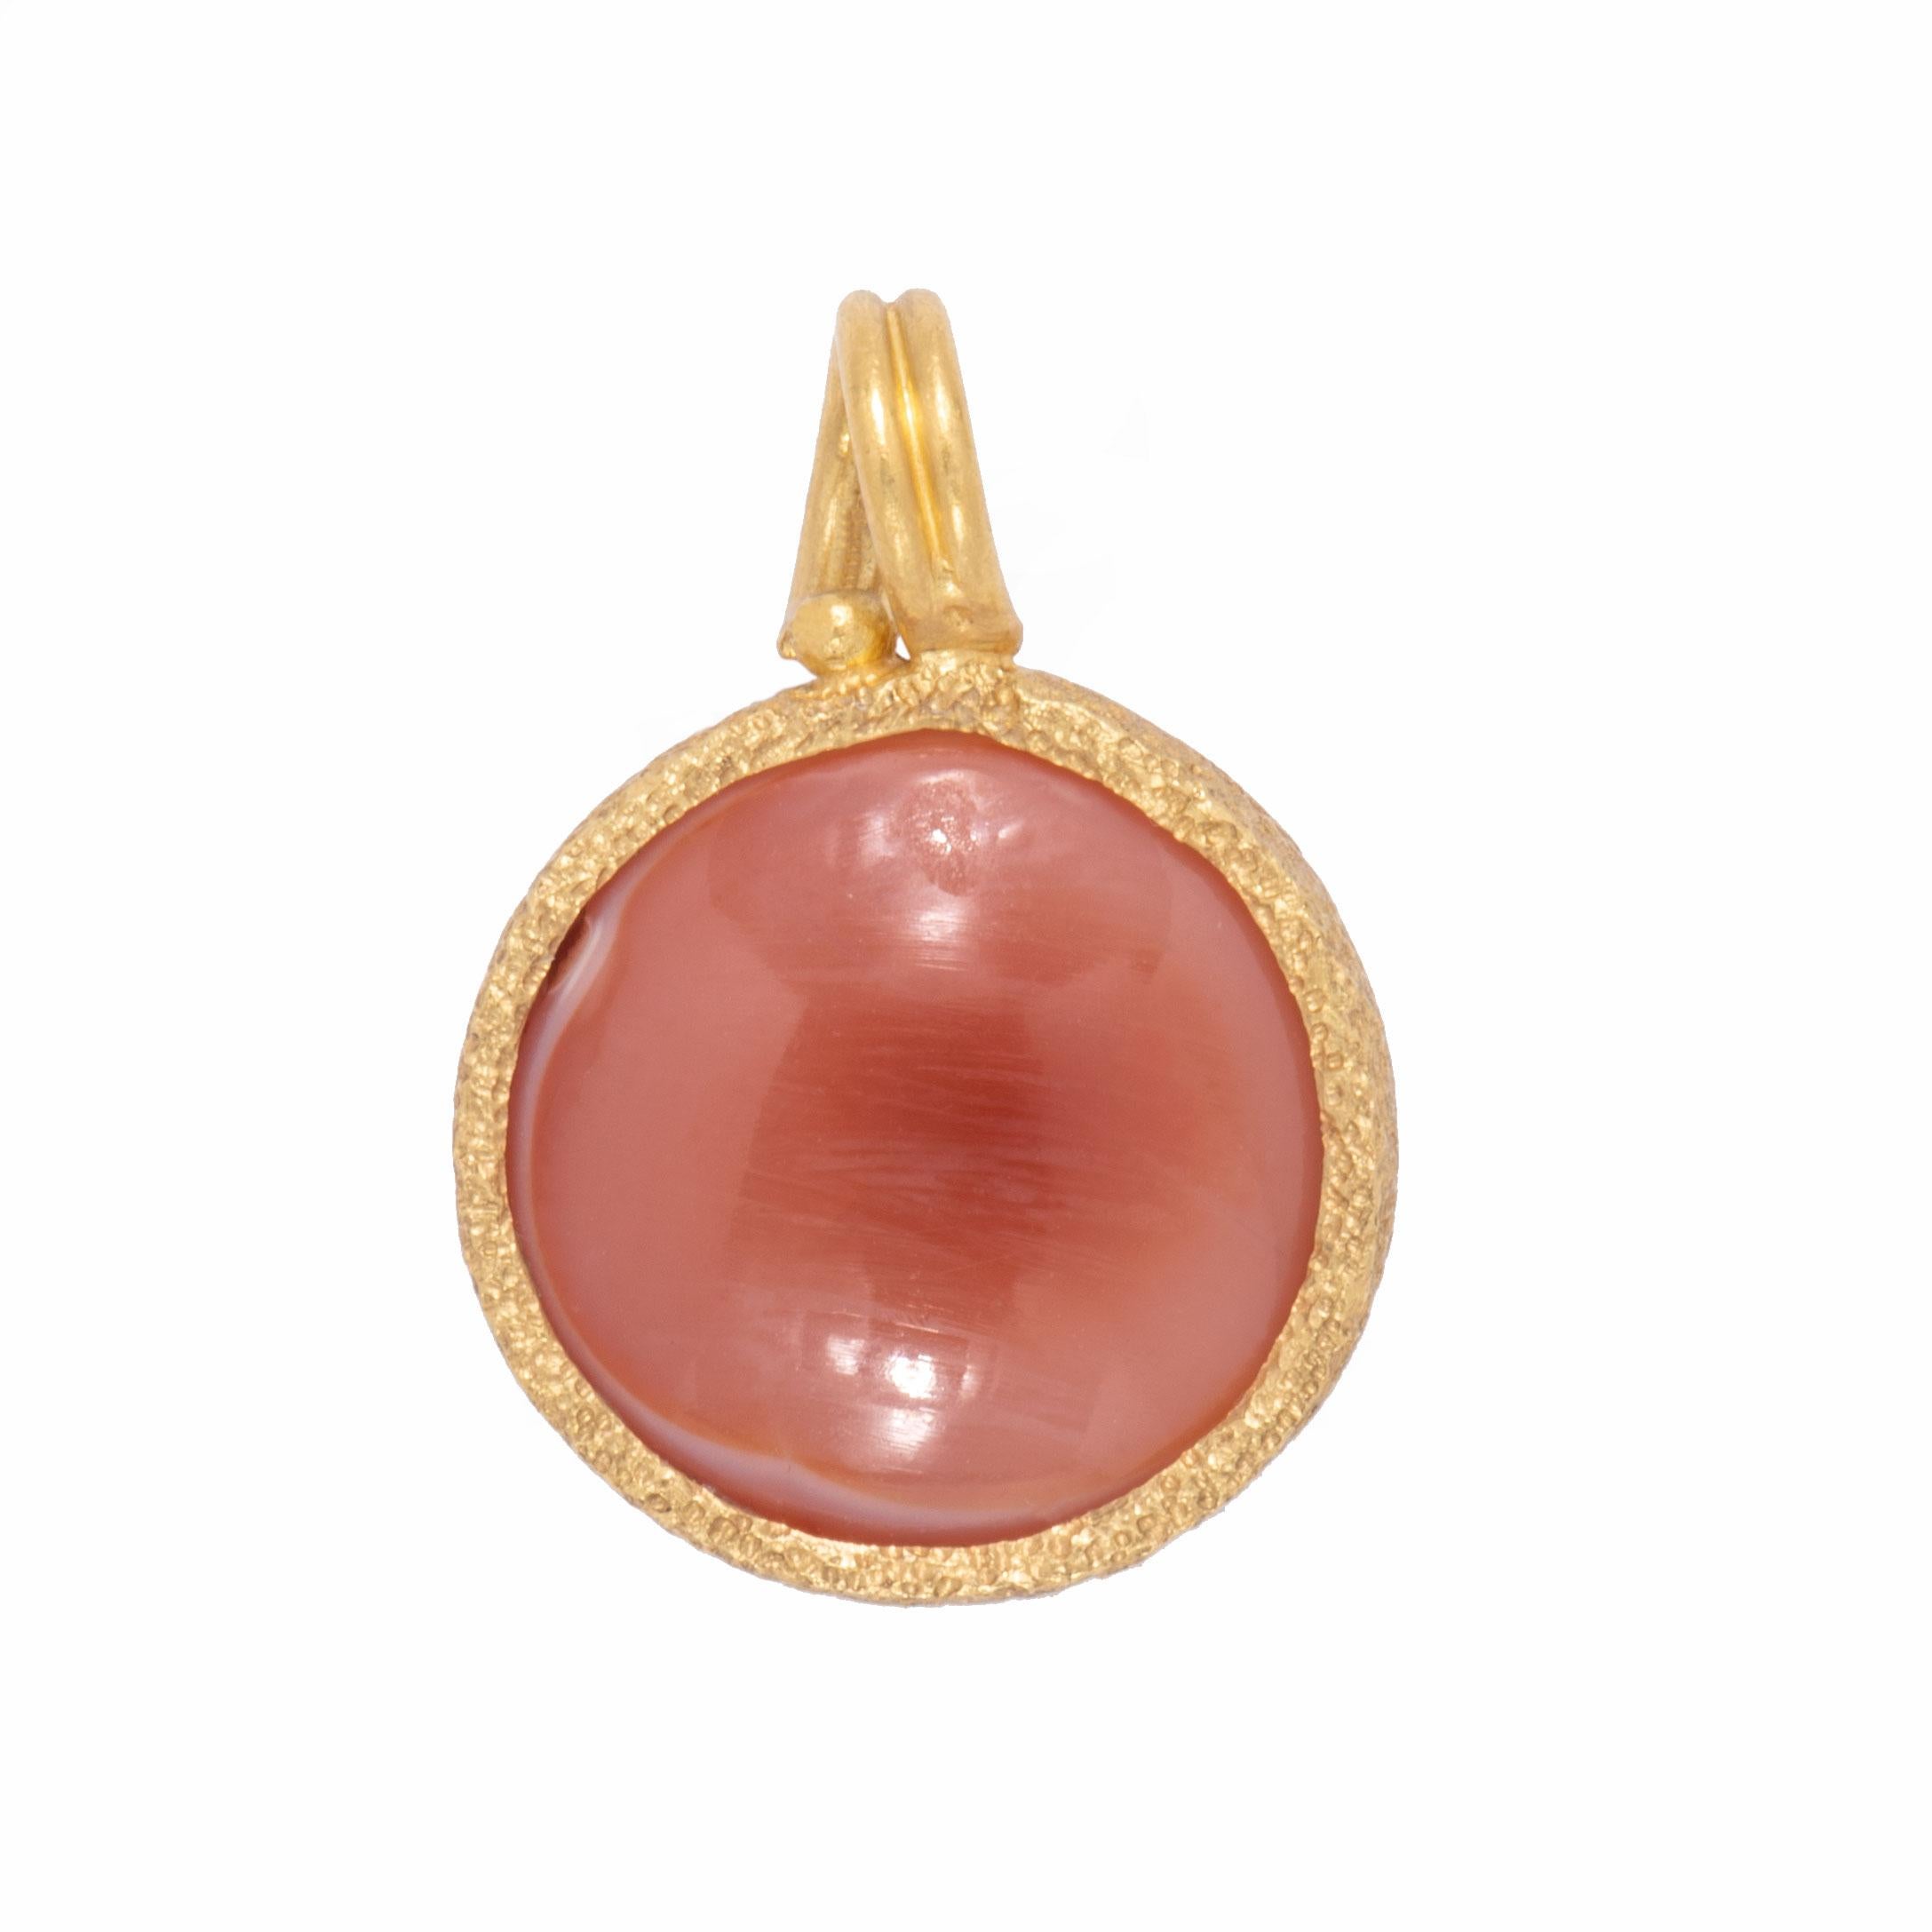 A natural orange curved disk of agate is set in 22 karat gold with a twist bail. The Yin/Yang symbol from ancient Chinese philosophy displays the principle that contradictory opposites such as light and dark, male and female cannot exist without the